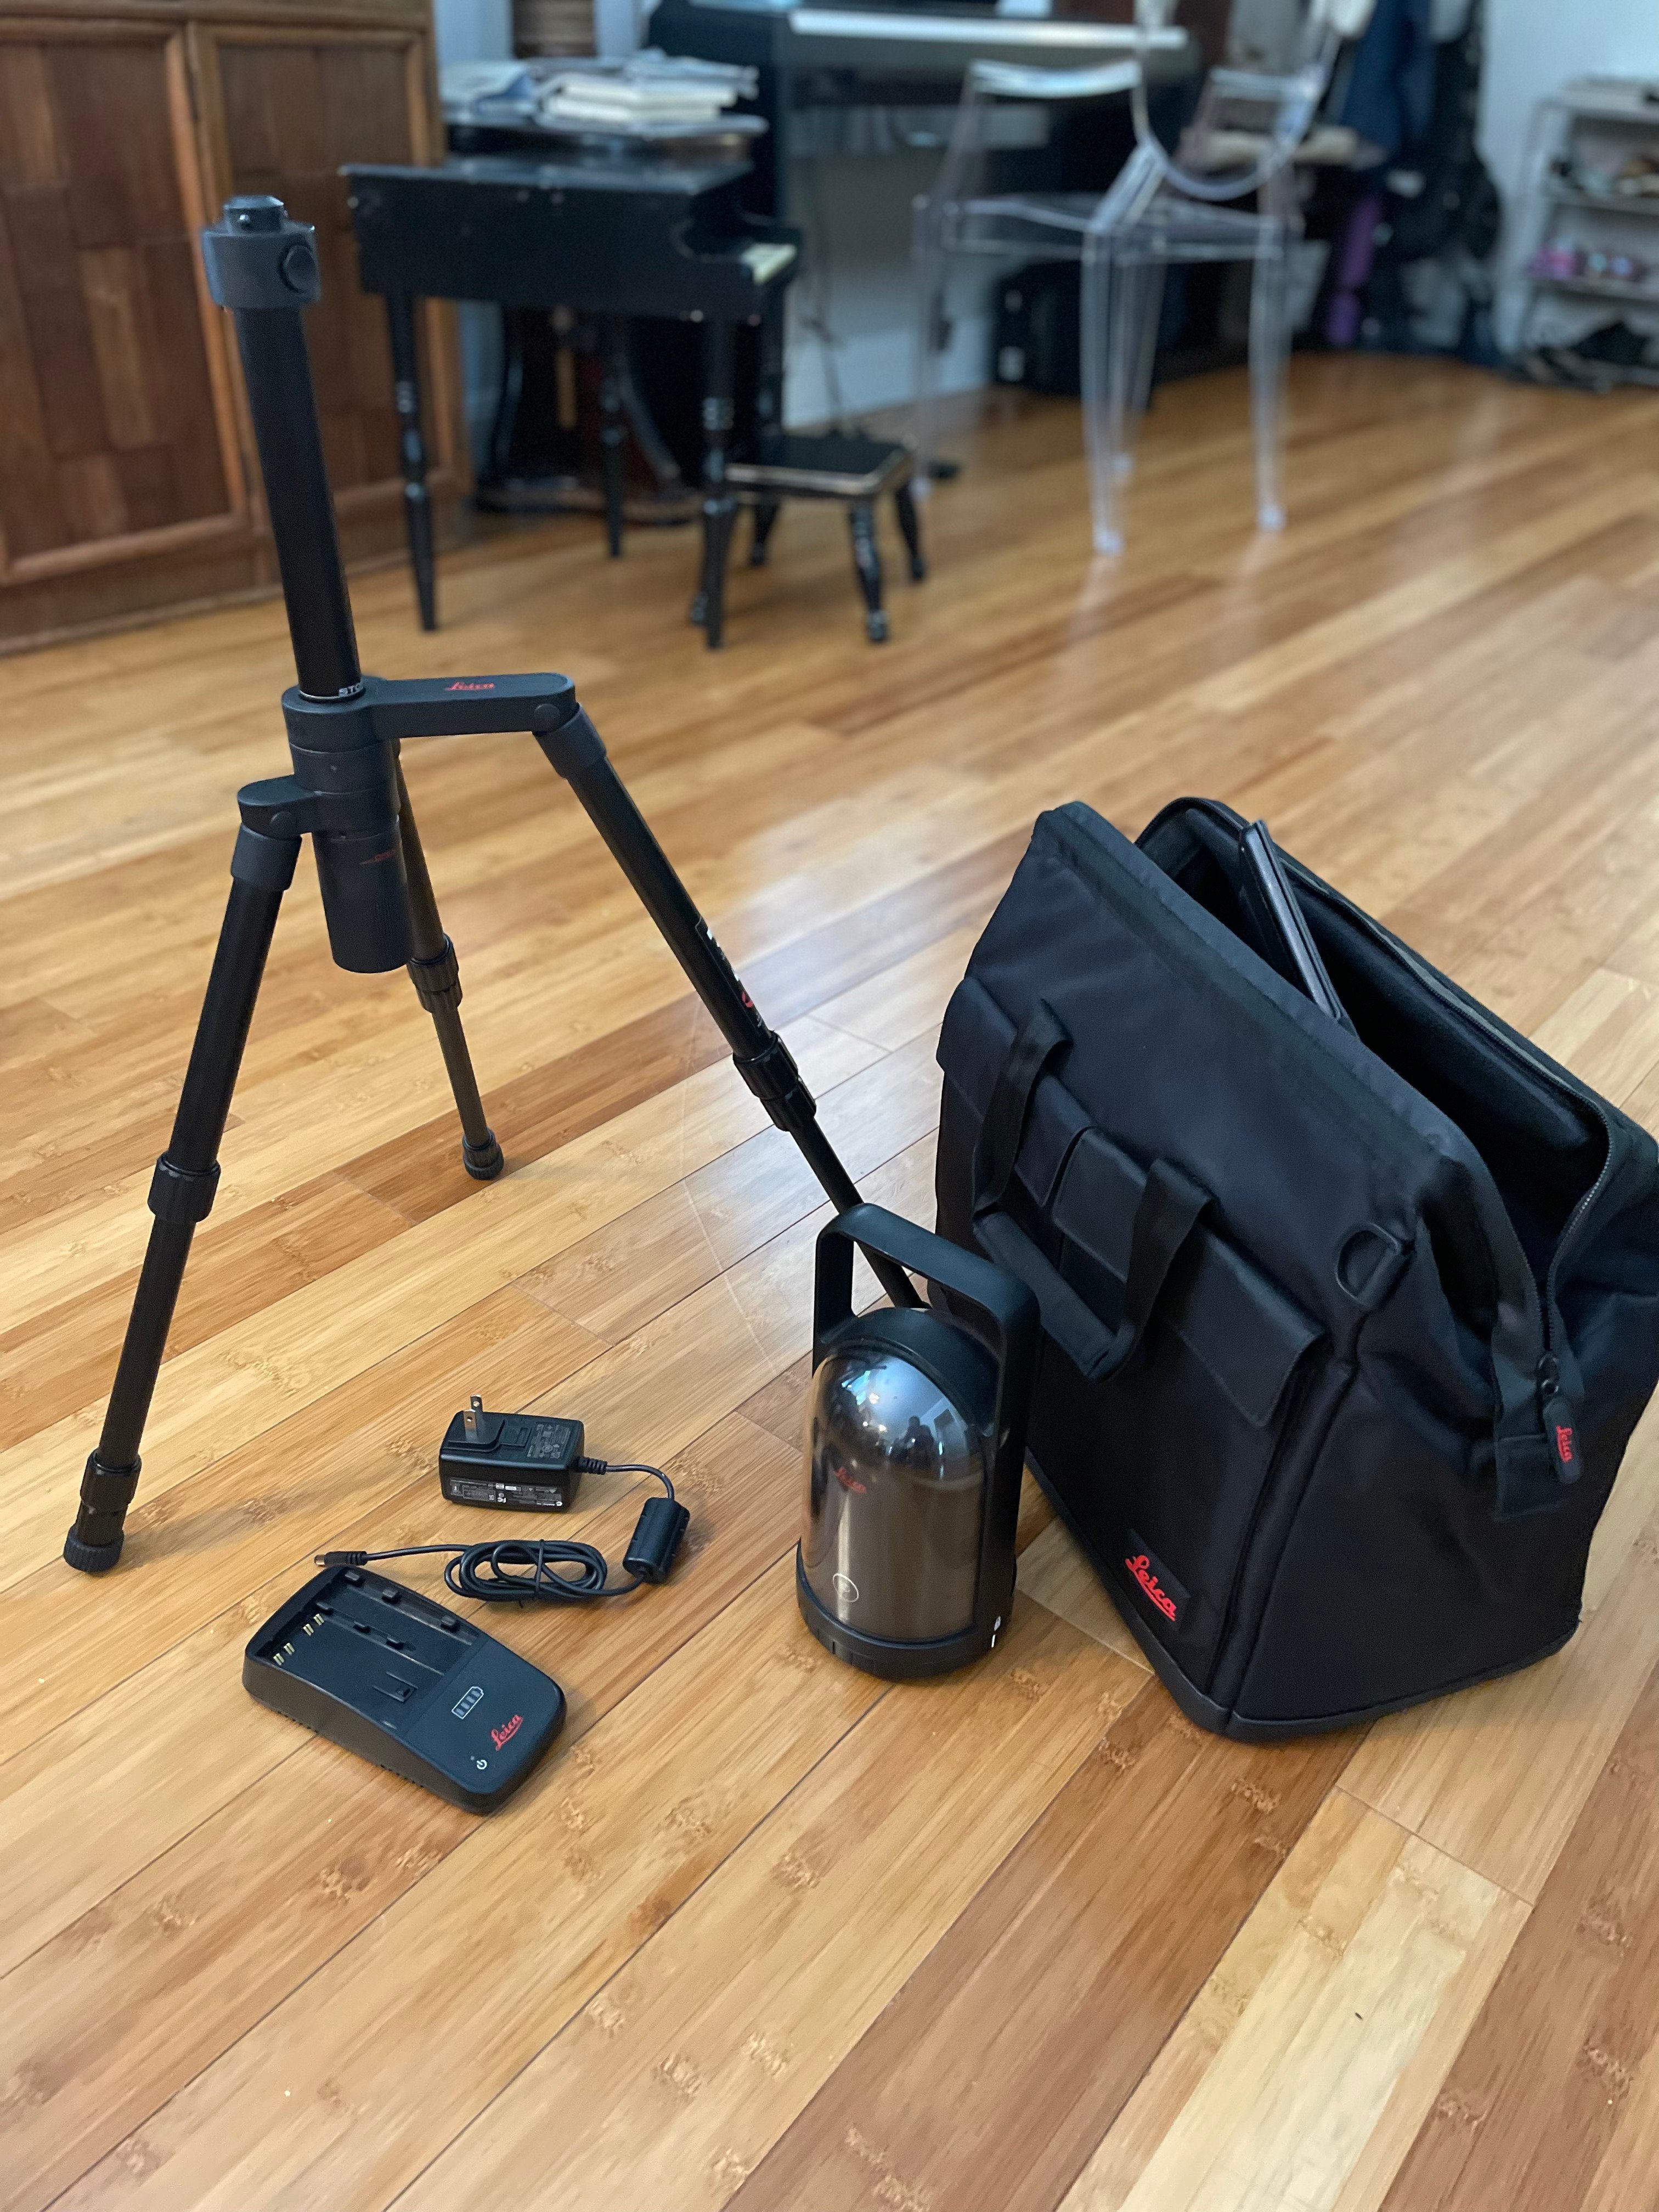 BLK360 with accessories and mission bag